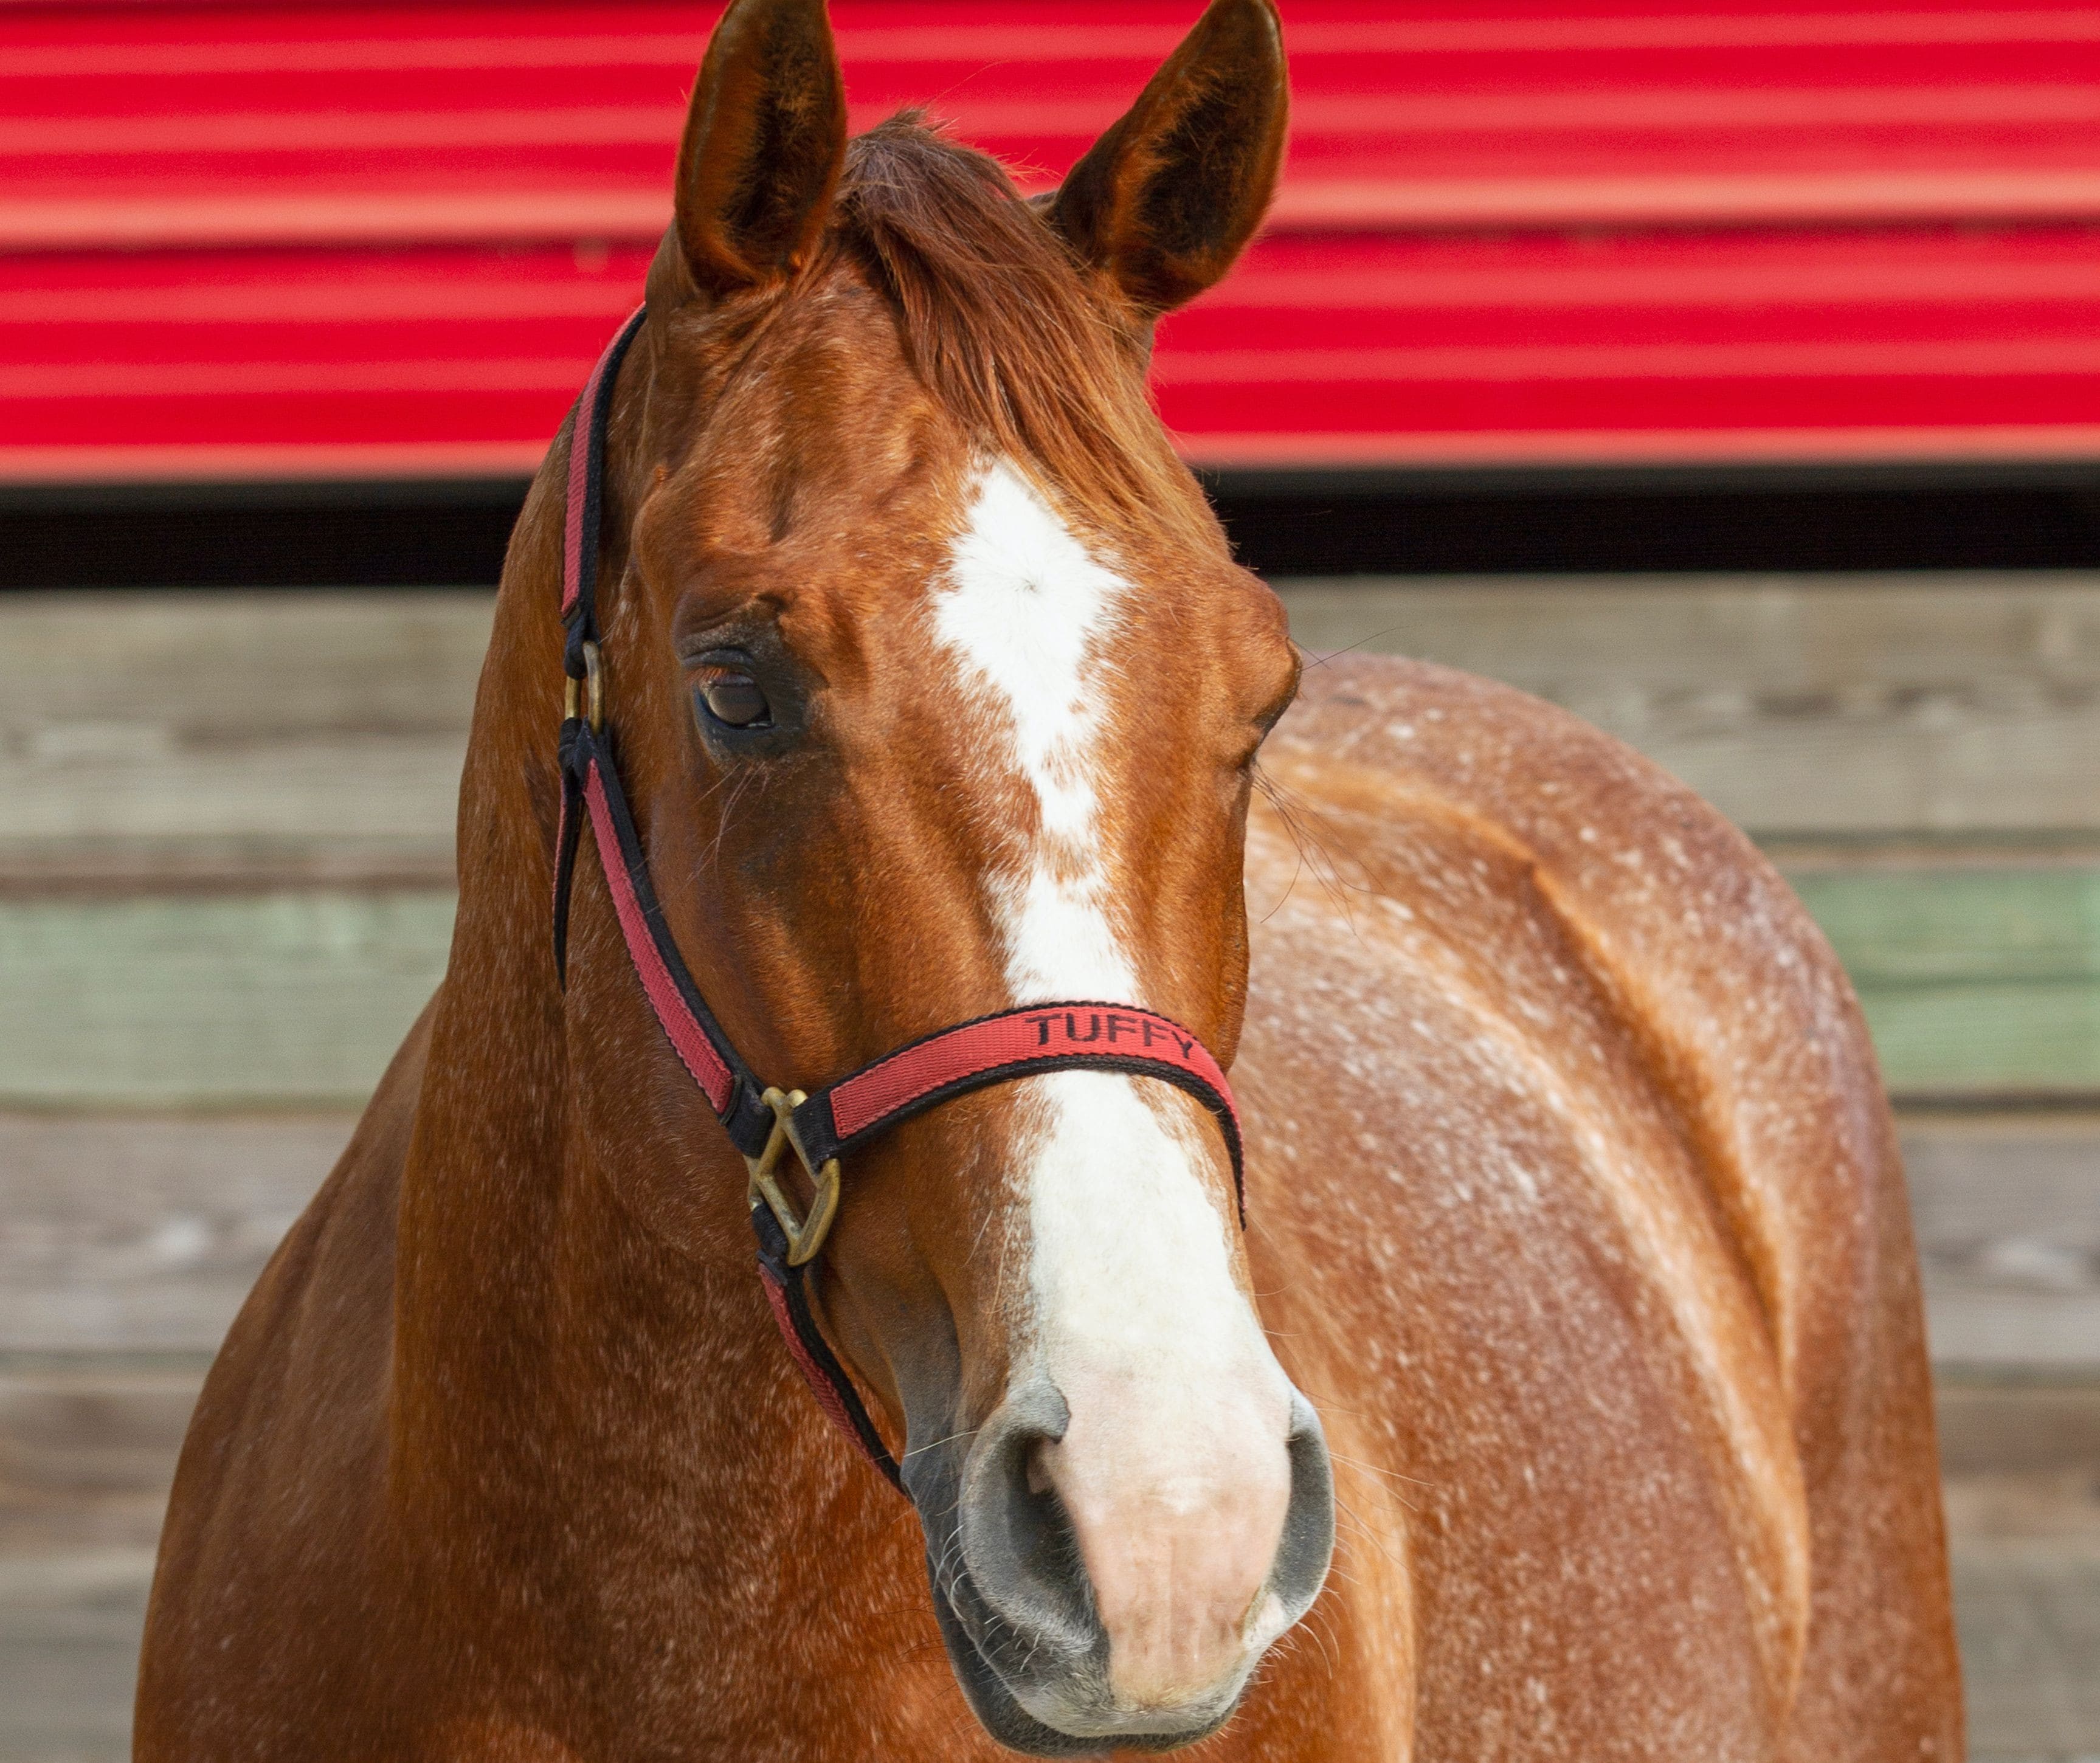 Tuffy is a lesson horse at J & S Performance Horses. He is a red roan gelding with a blaze, wearing a red and black halter with his name on it